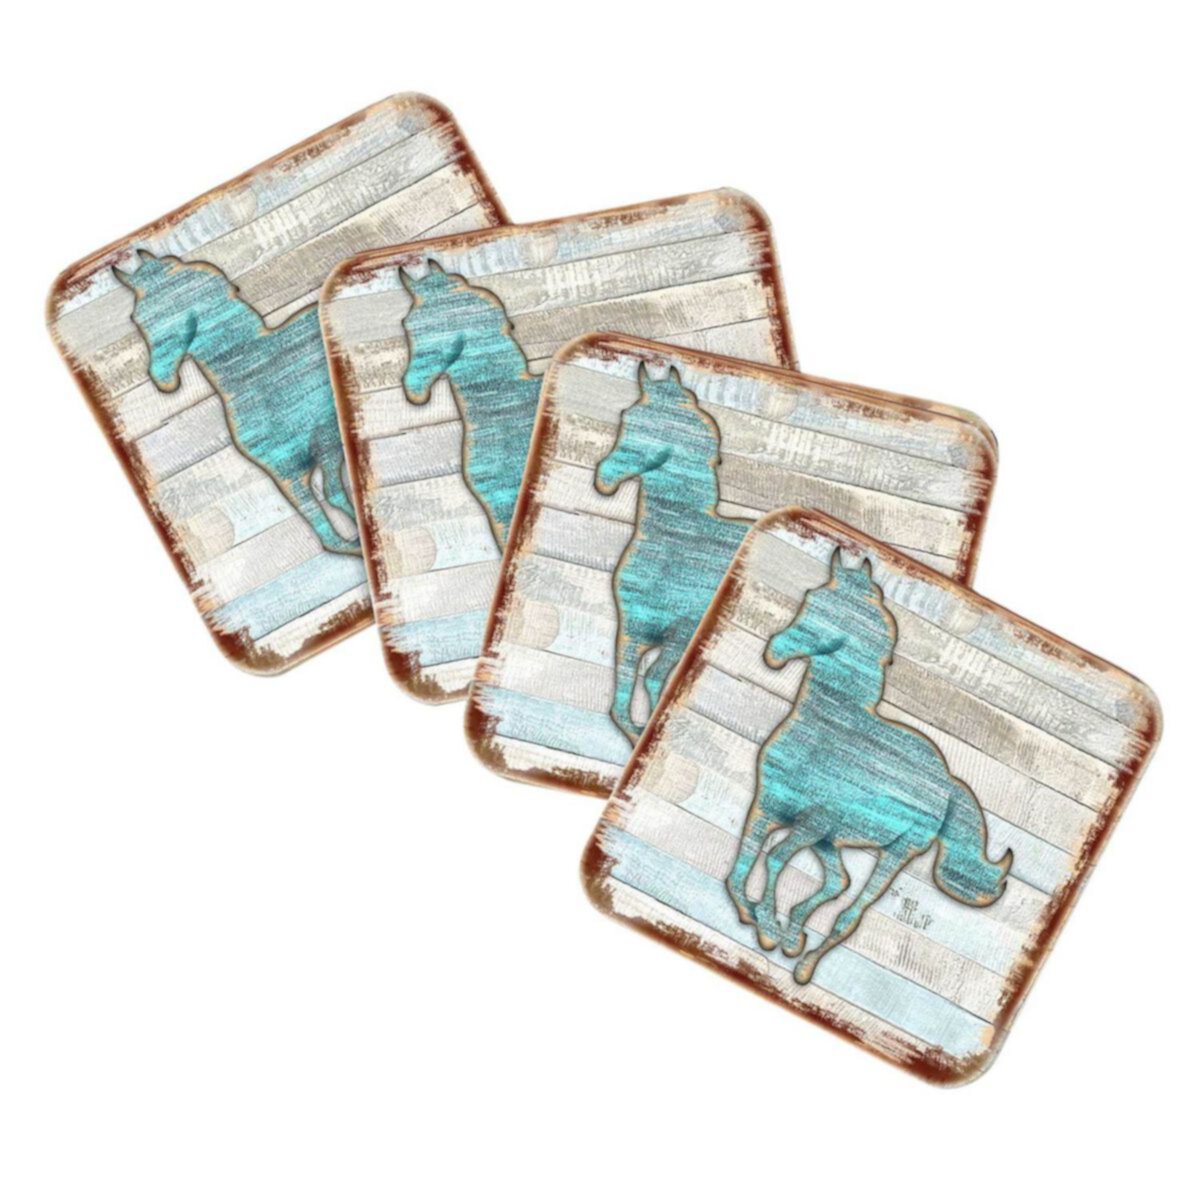 Horse Wooden Cork Coasters Gift Set of 4 by Nature Wonders Nature Wonders